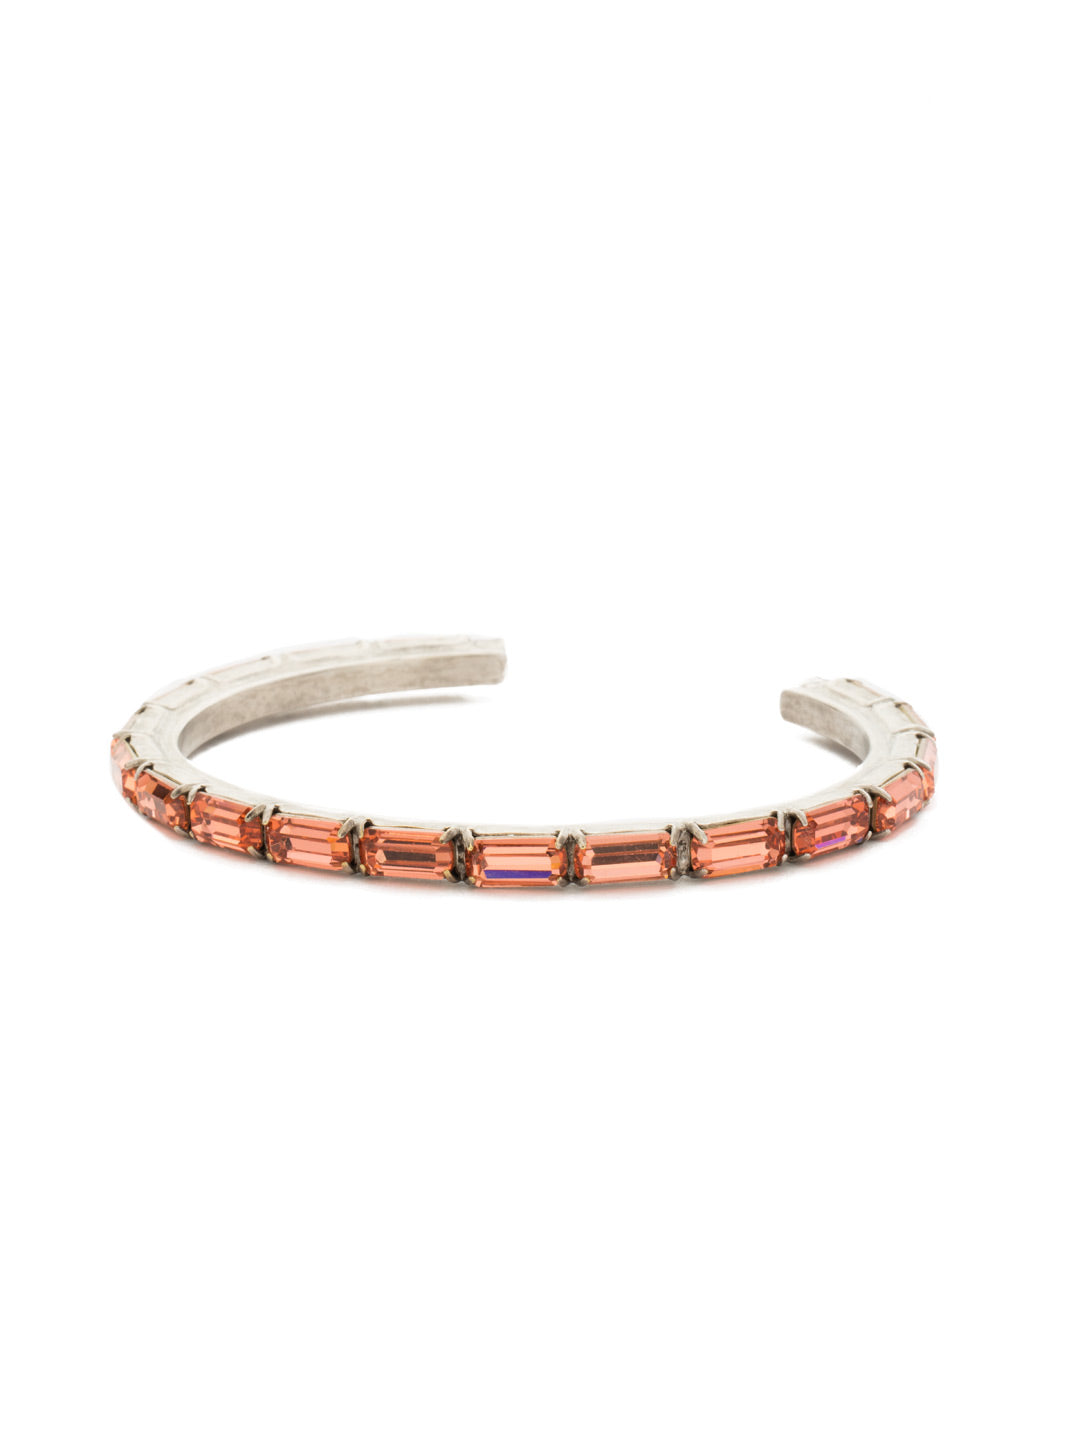 Brilliant Baguette Cuff Bracelet - BDK49ASCRL - This cuff bracelet features repeating crystal baguettes and can be mixed and matched in a myriad of ways. From Sorrelli's Coral collection in our Antique Silver-tone finish.